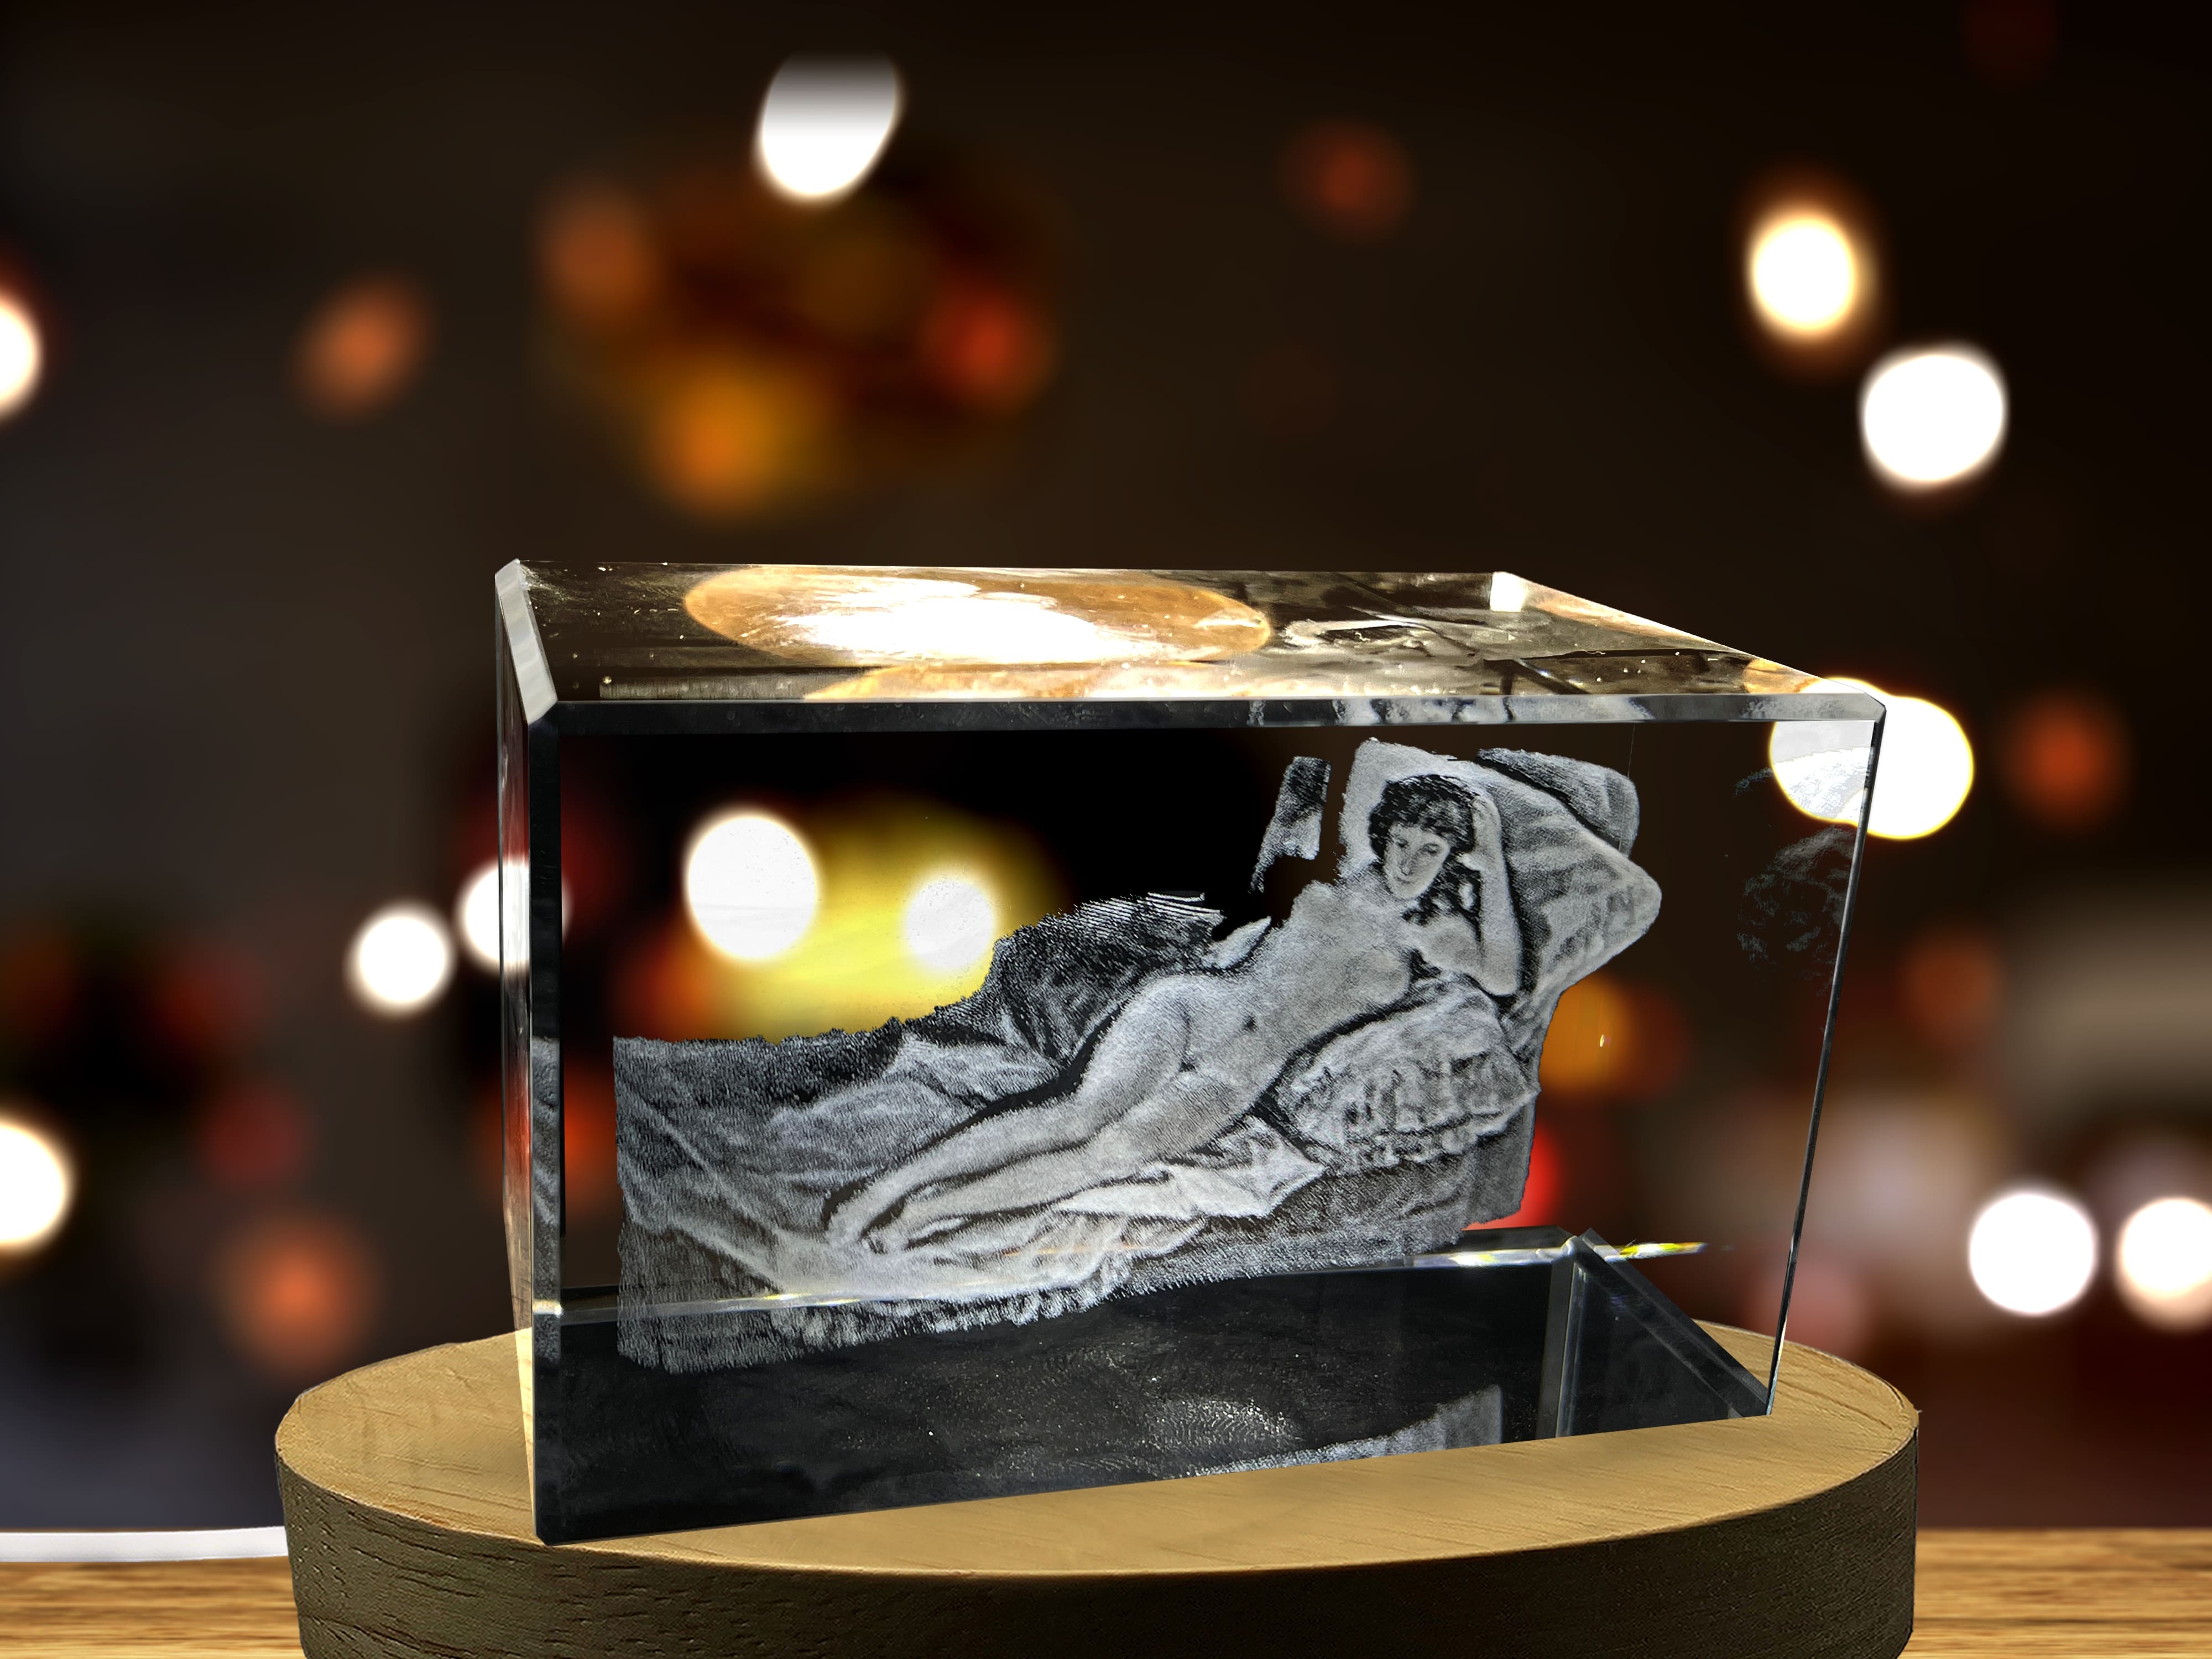 The Naked Maja 3D Engraved Crystal Decor with LED Base Light A&B Crystal Collection